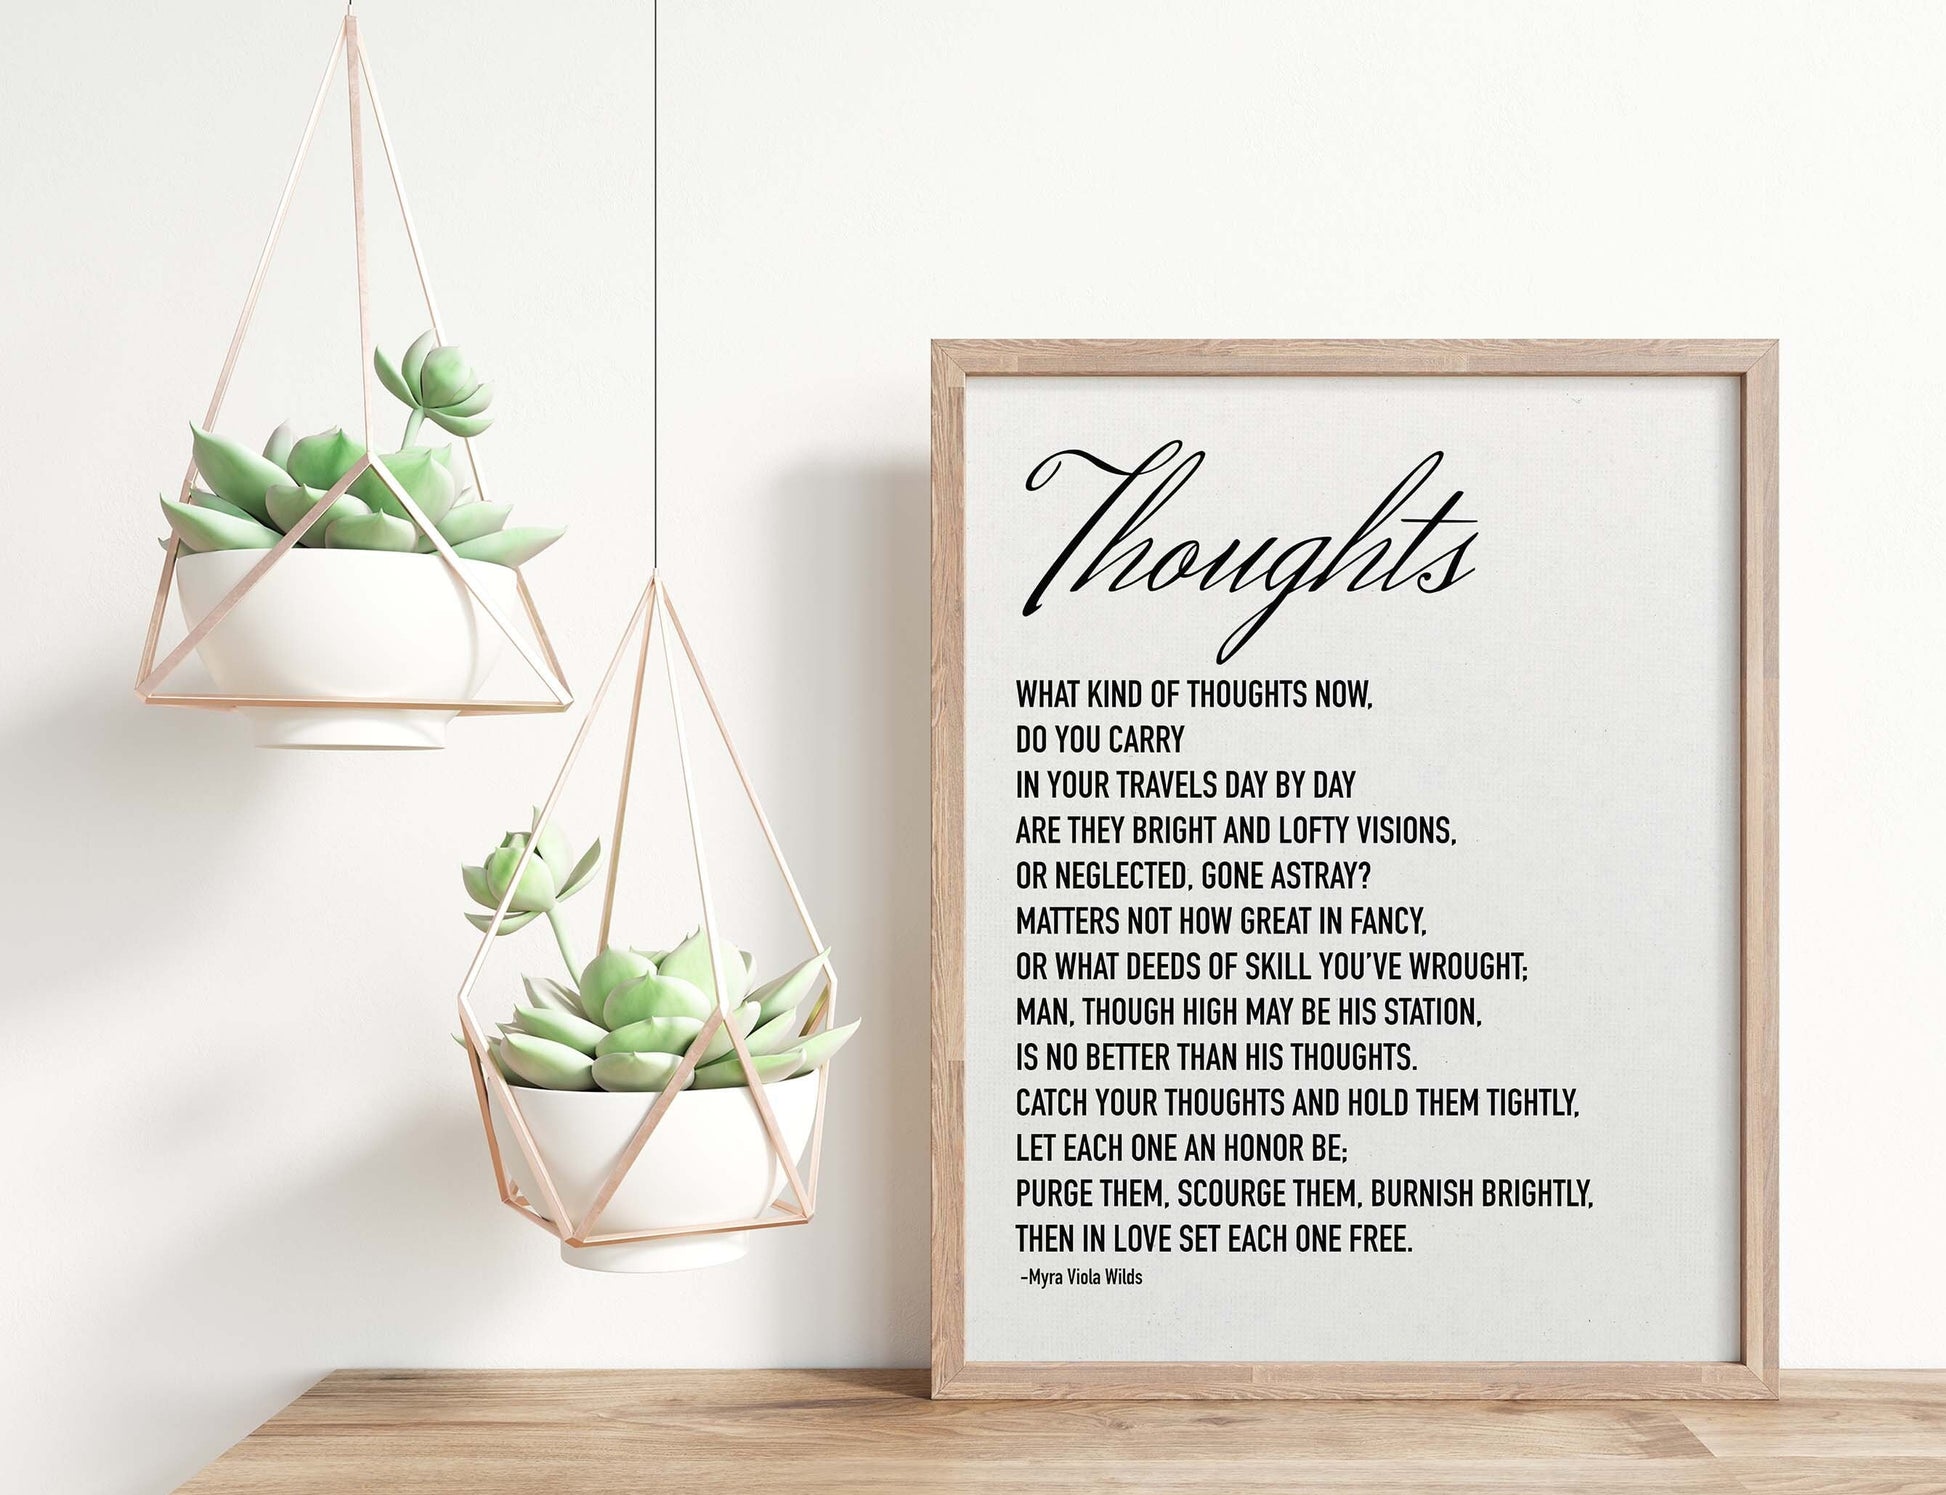 Thoughts poem by Myra Viola Wilds black on white poster in wood frame mockup